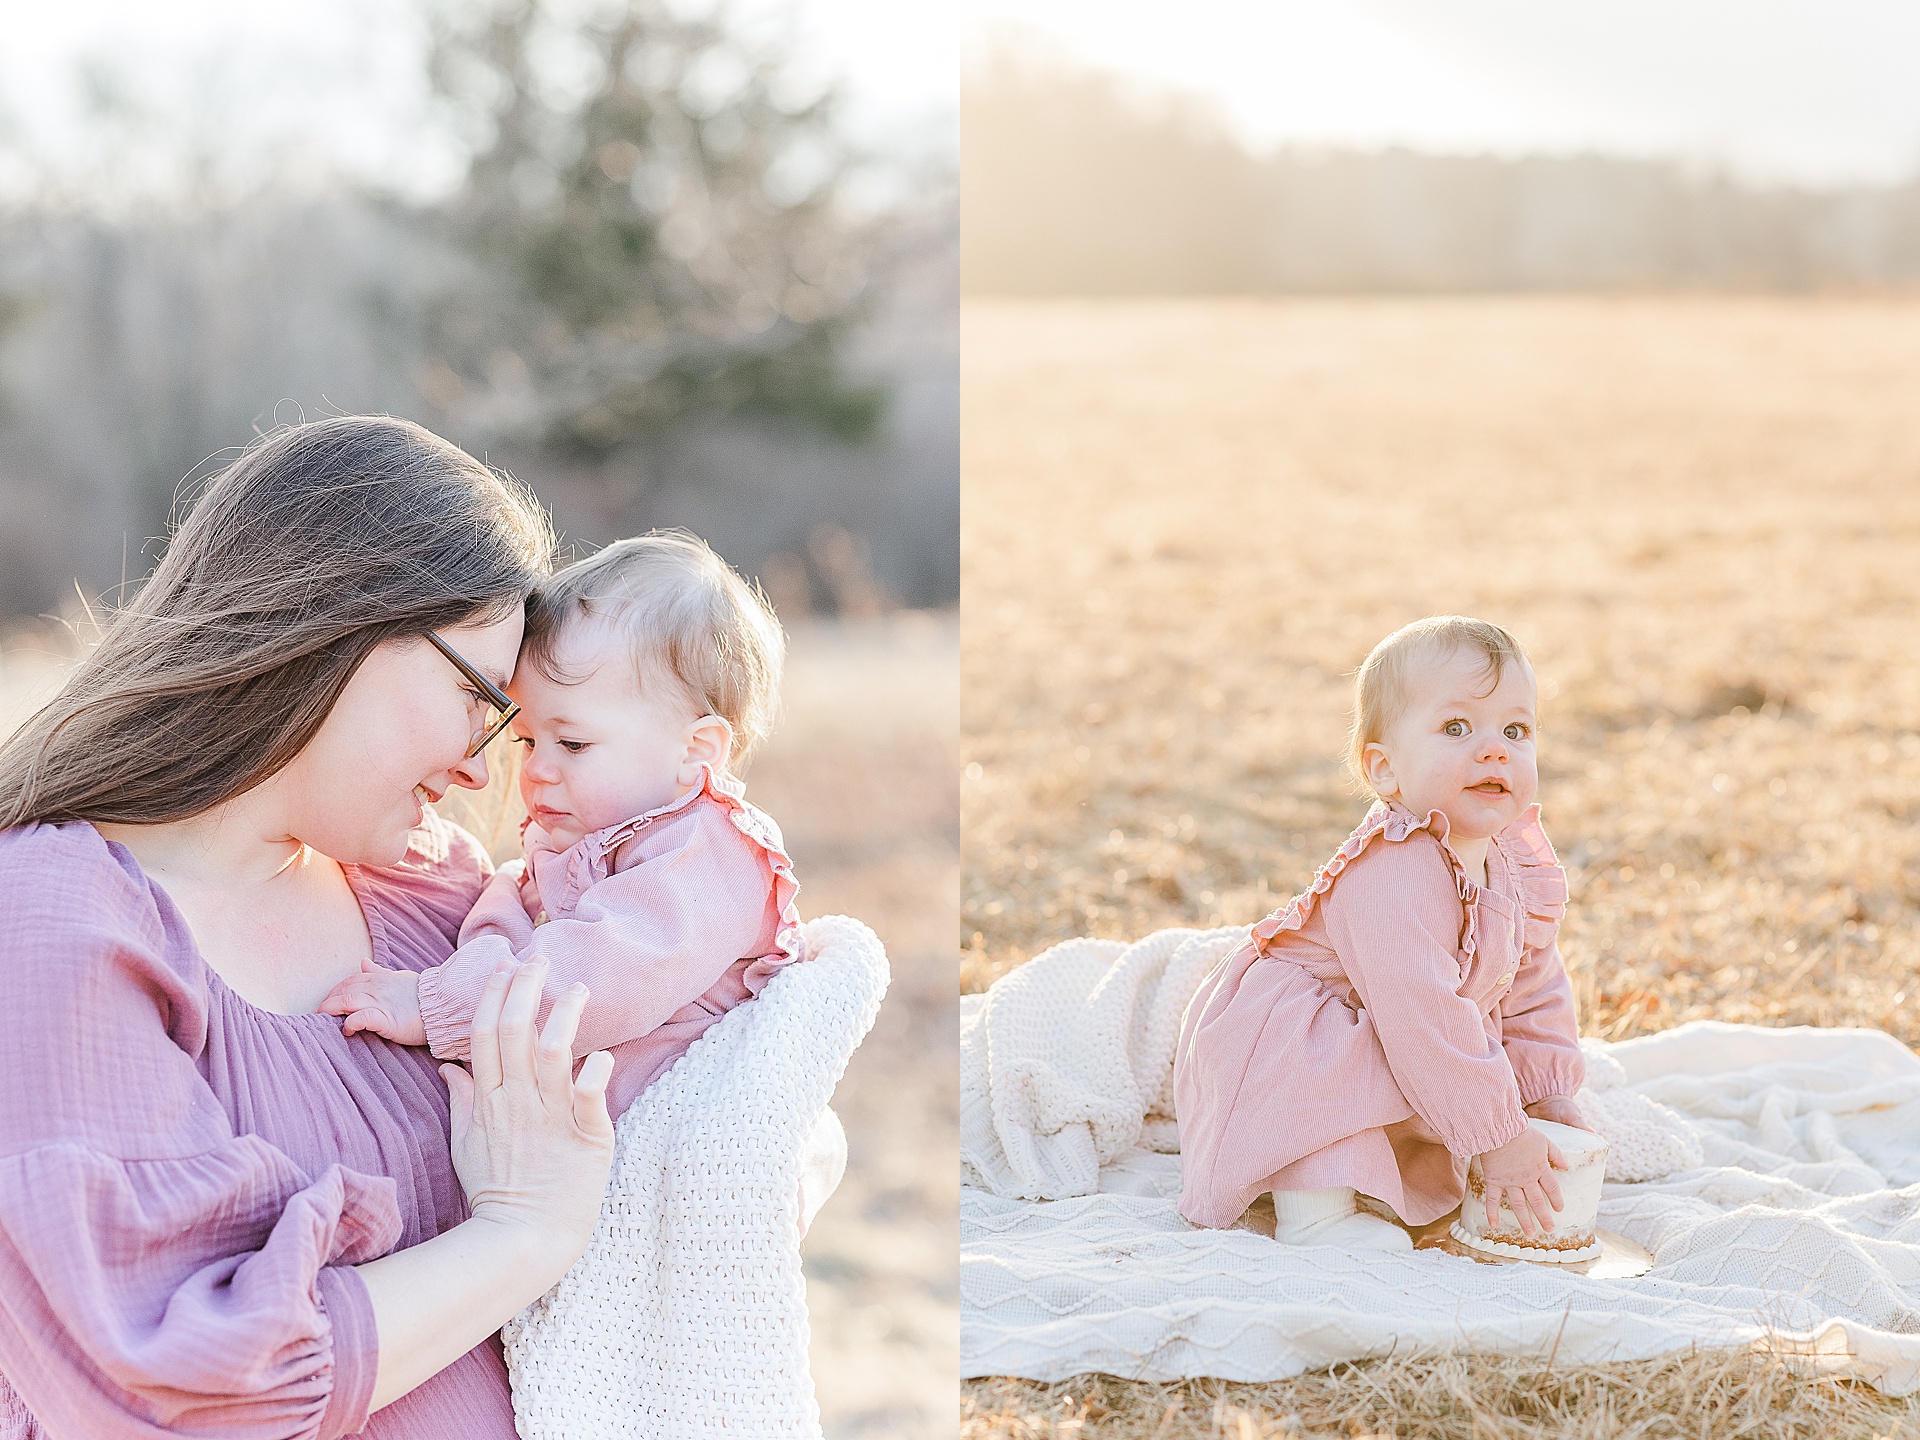 mom snuggles baby and baby sits on blanket with cake during first birthday cake smash photo session with Sara Sniderman Photography at Cow Common, Wayland Massachusetts